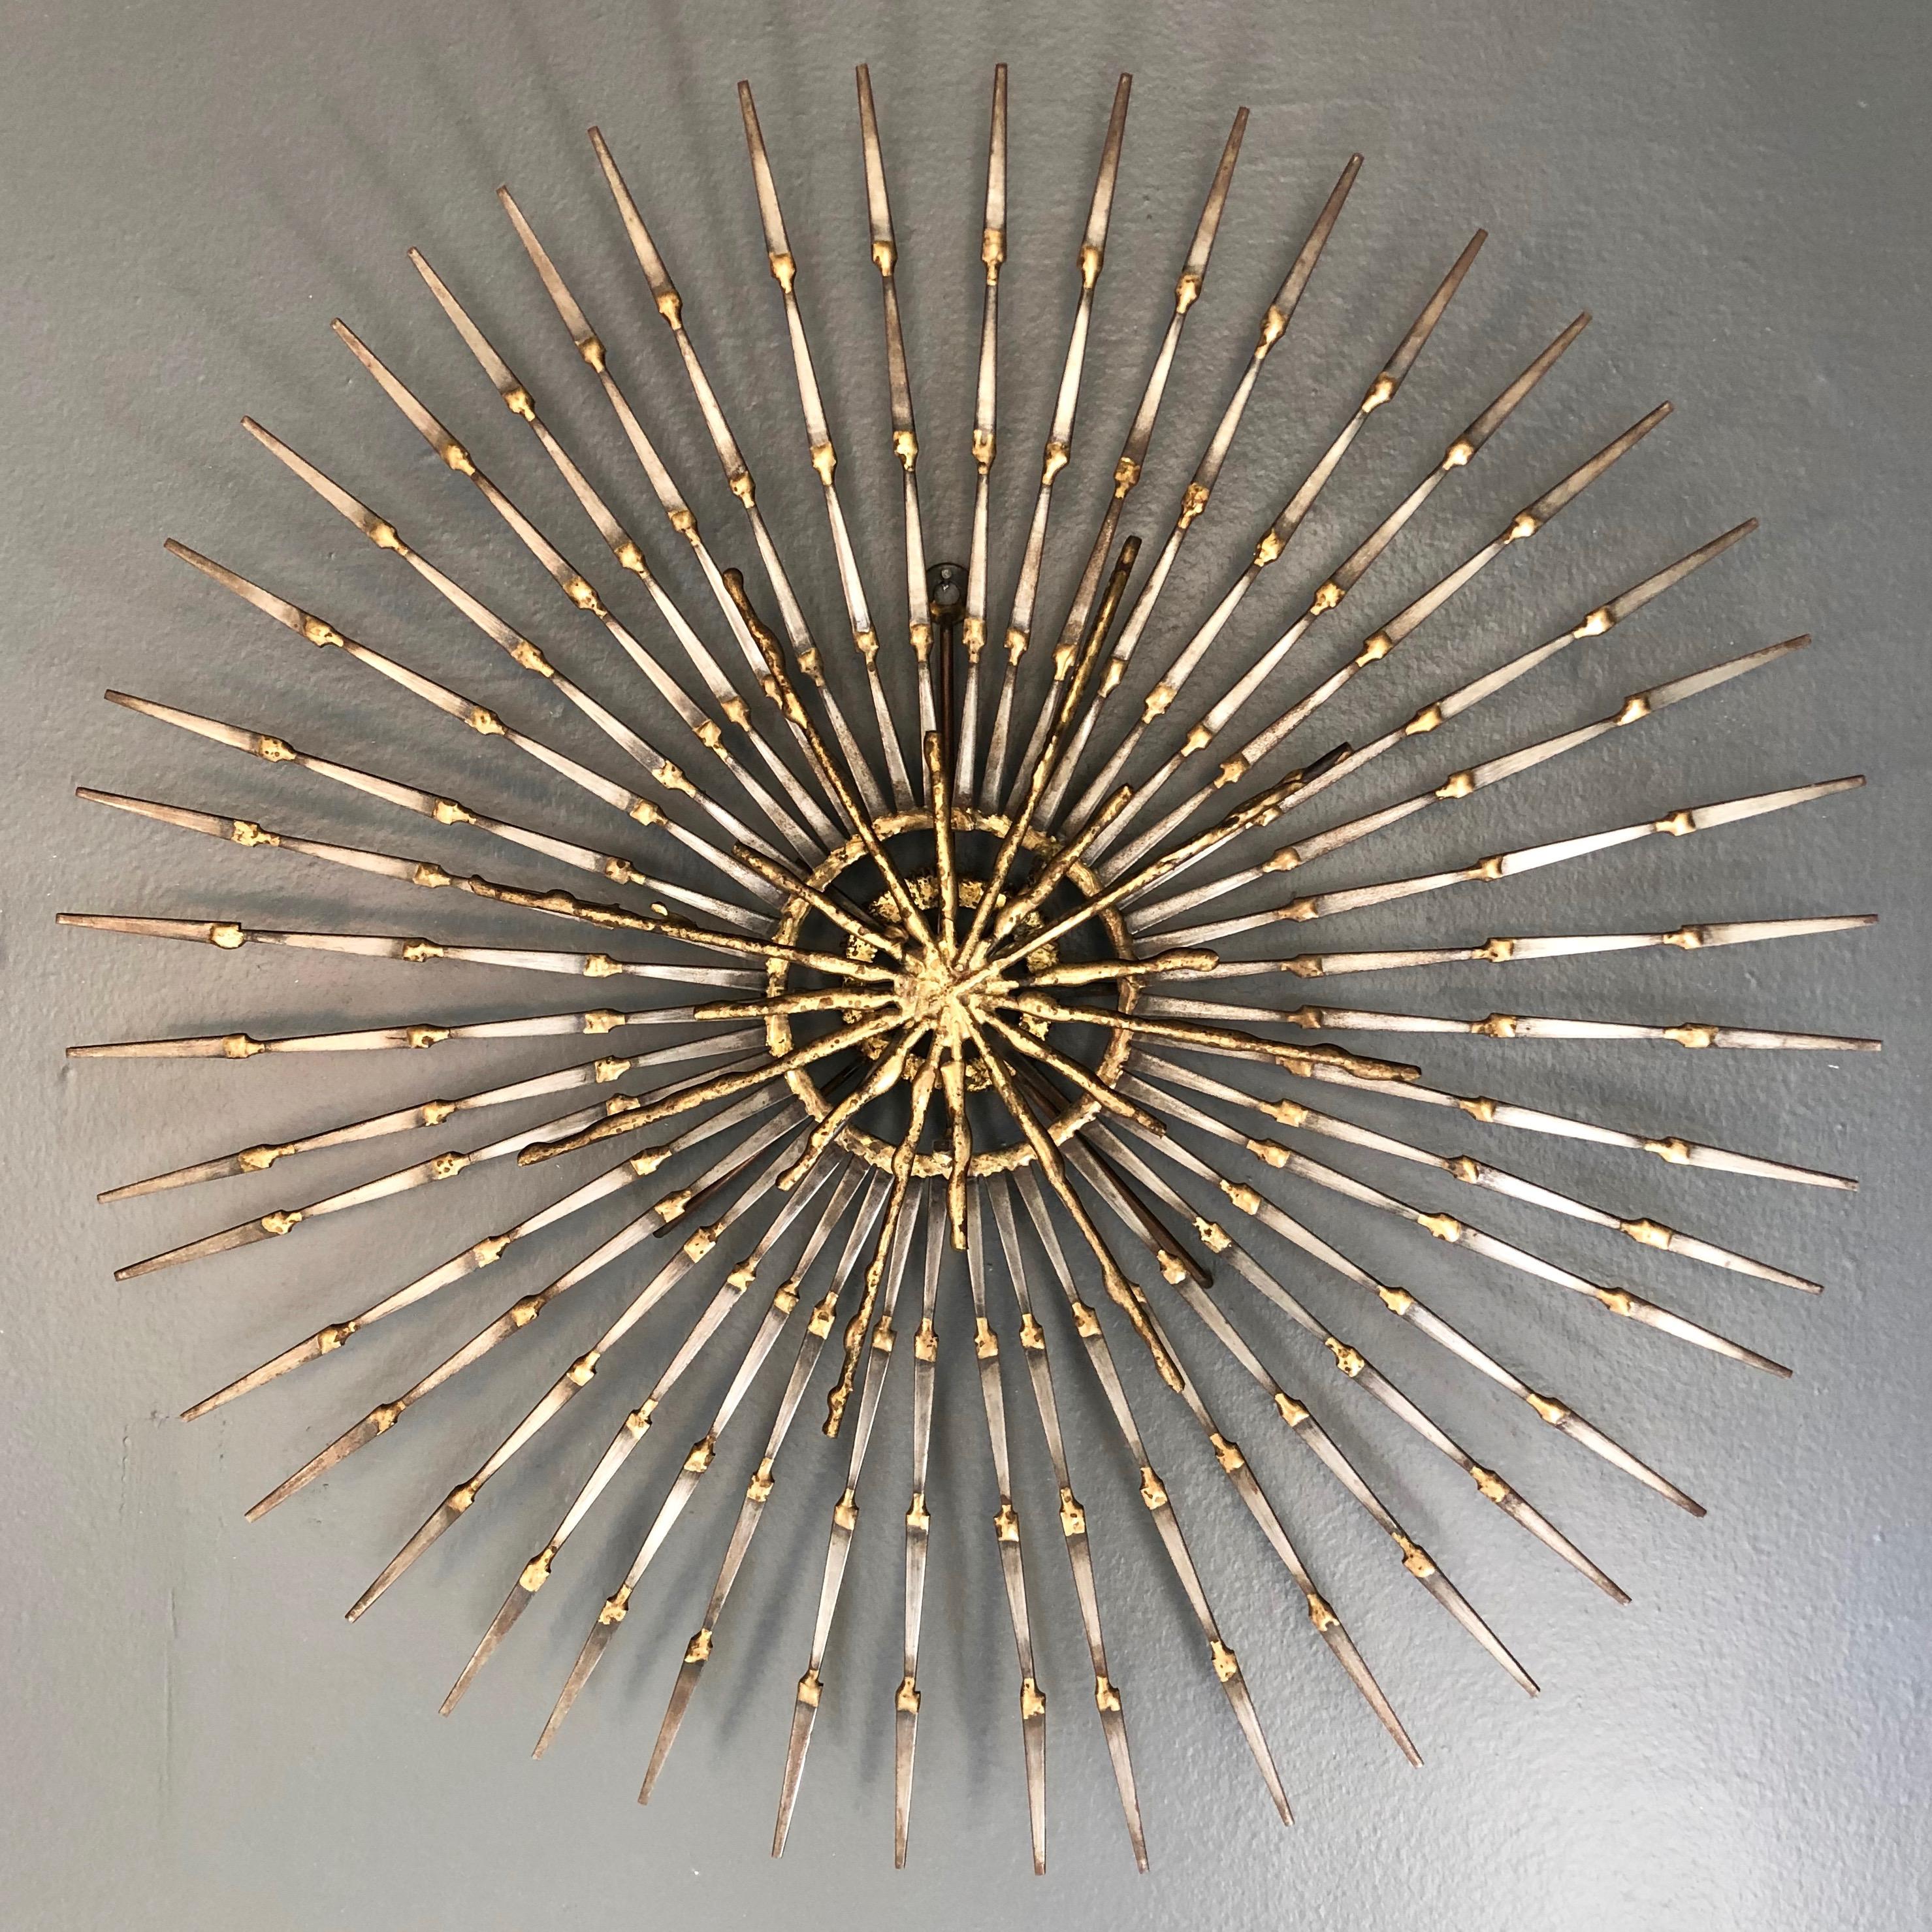 A large Brutalist sunburst with starburst overlay nail art wall sculpture by Ron Schmidt.

Very uncommon multiplanar design with forty-four brass welded iron nail rays radiating sunburst-style from a central brass ring that floats in front of an